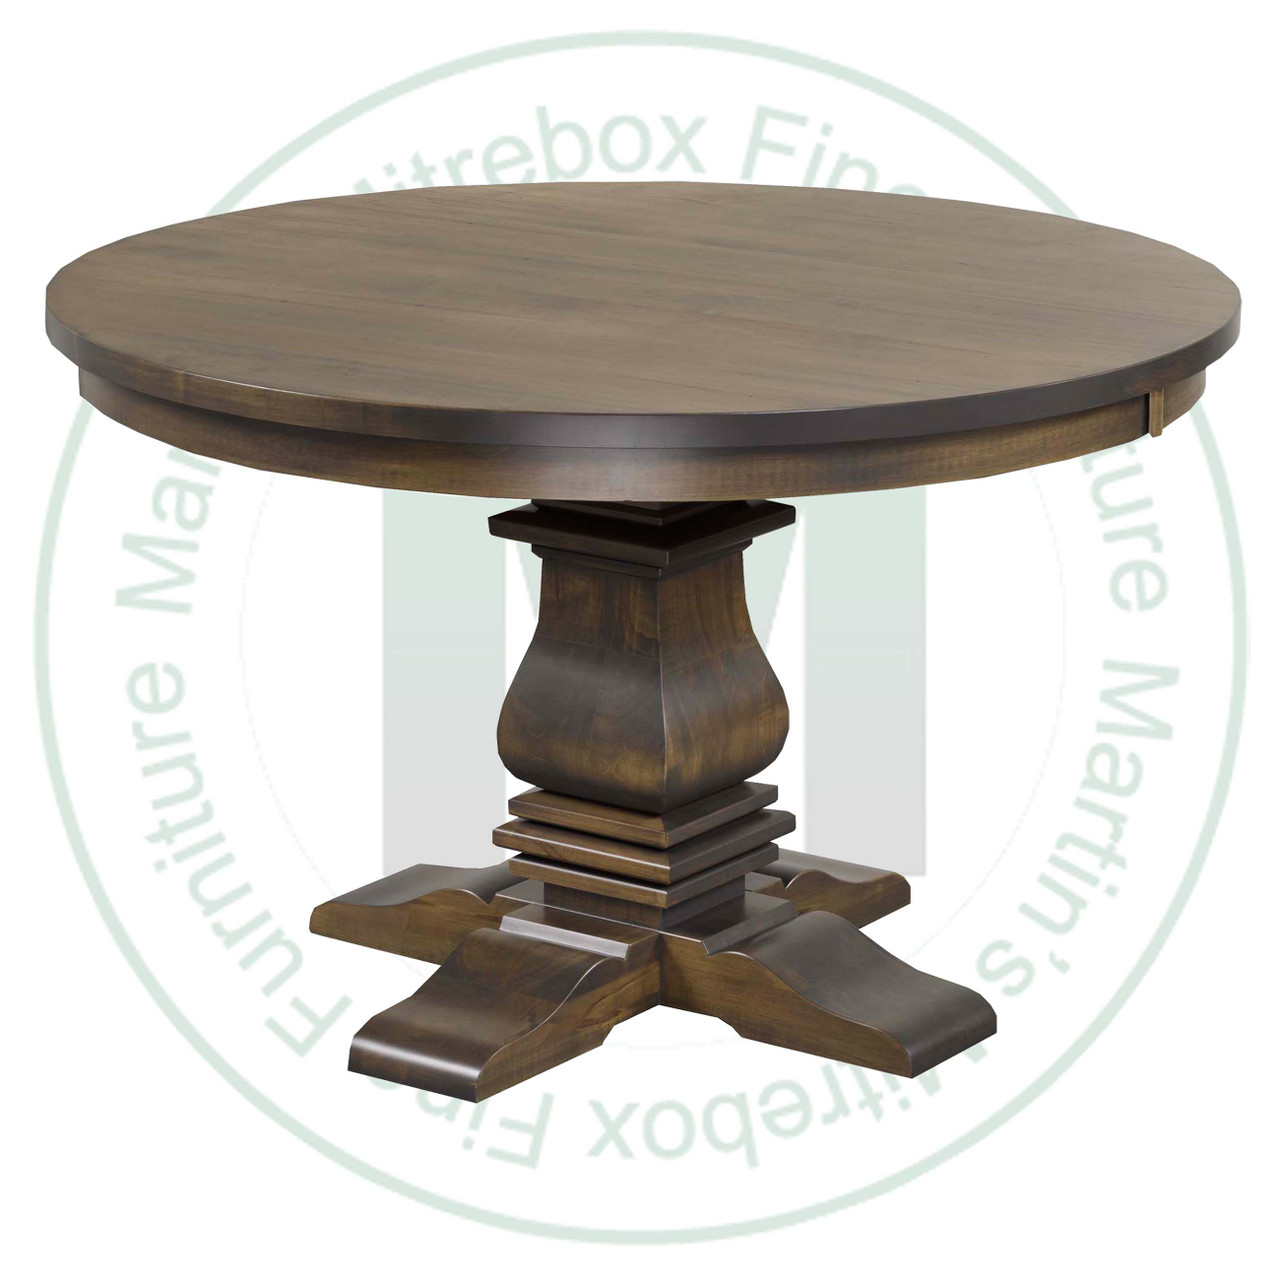 Wormy Maple Spartan Collection Single Pedestal Table 42''D x 48''W x 30''H. Table Has 1.25'' Thick Top